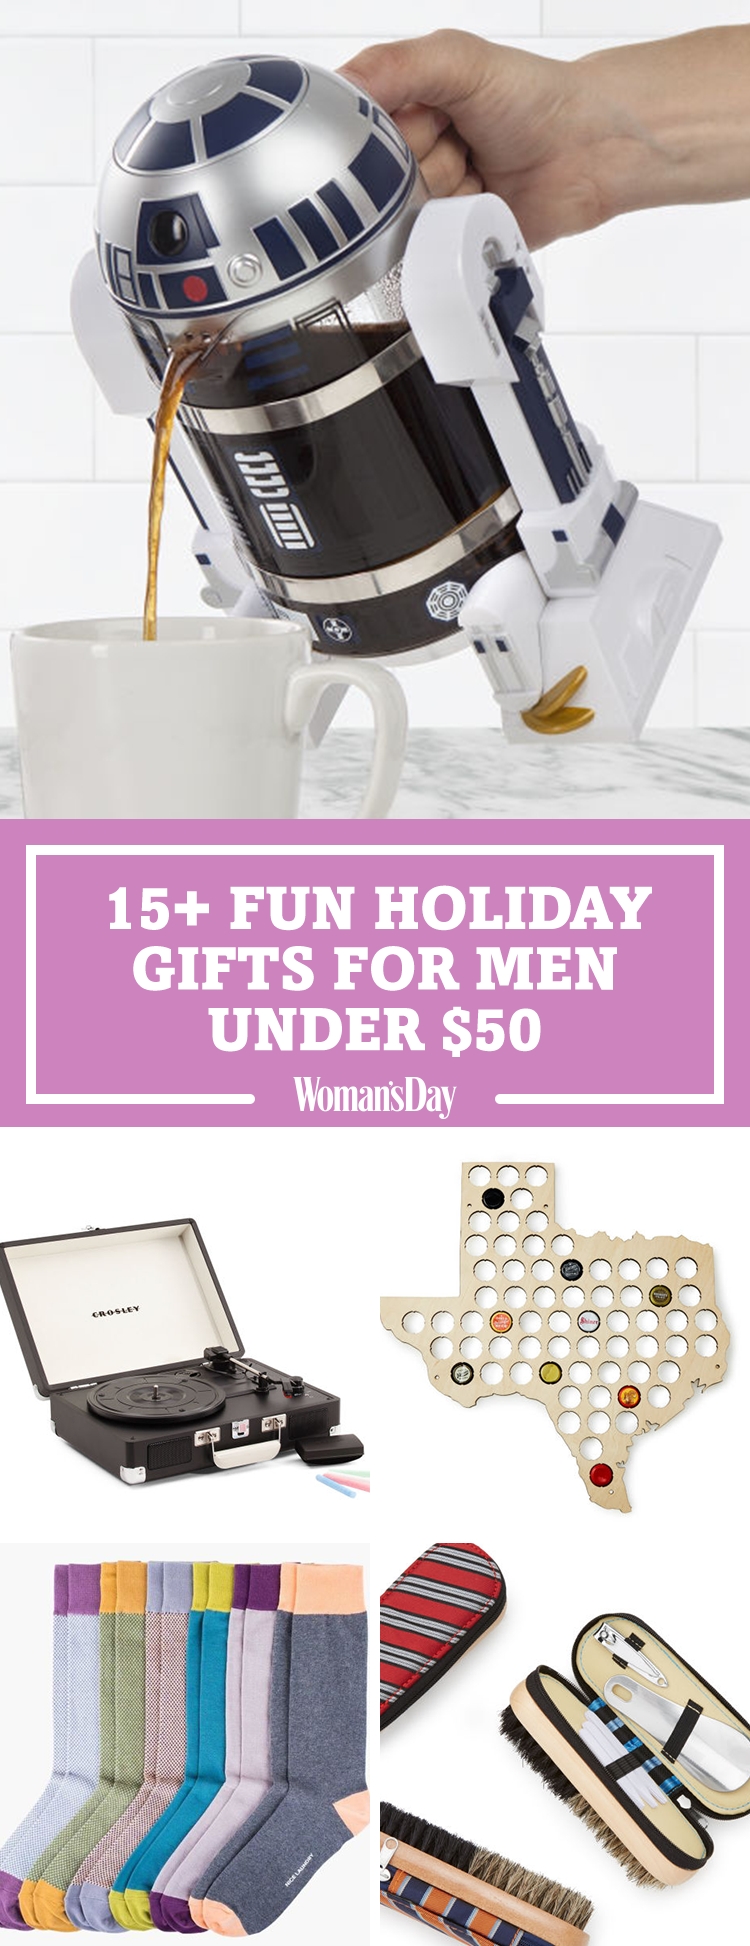 10 Lovely Christmas Gift Ideas For Couples Who Have Everything 20 best christmas gifts for men great gift ideas for guys who have 1 2022